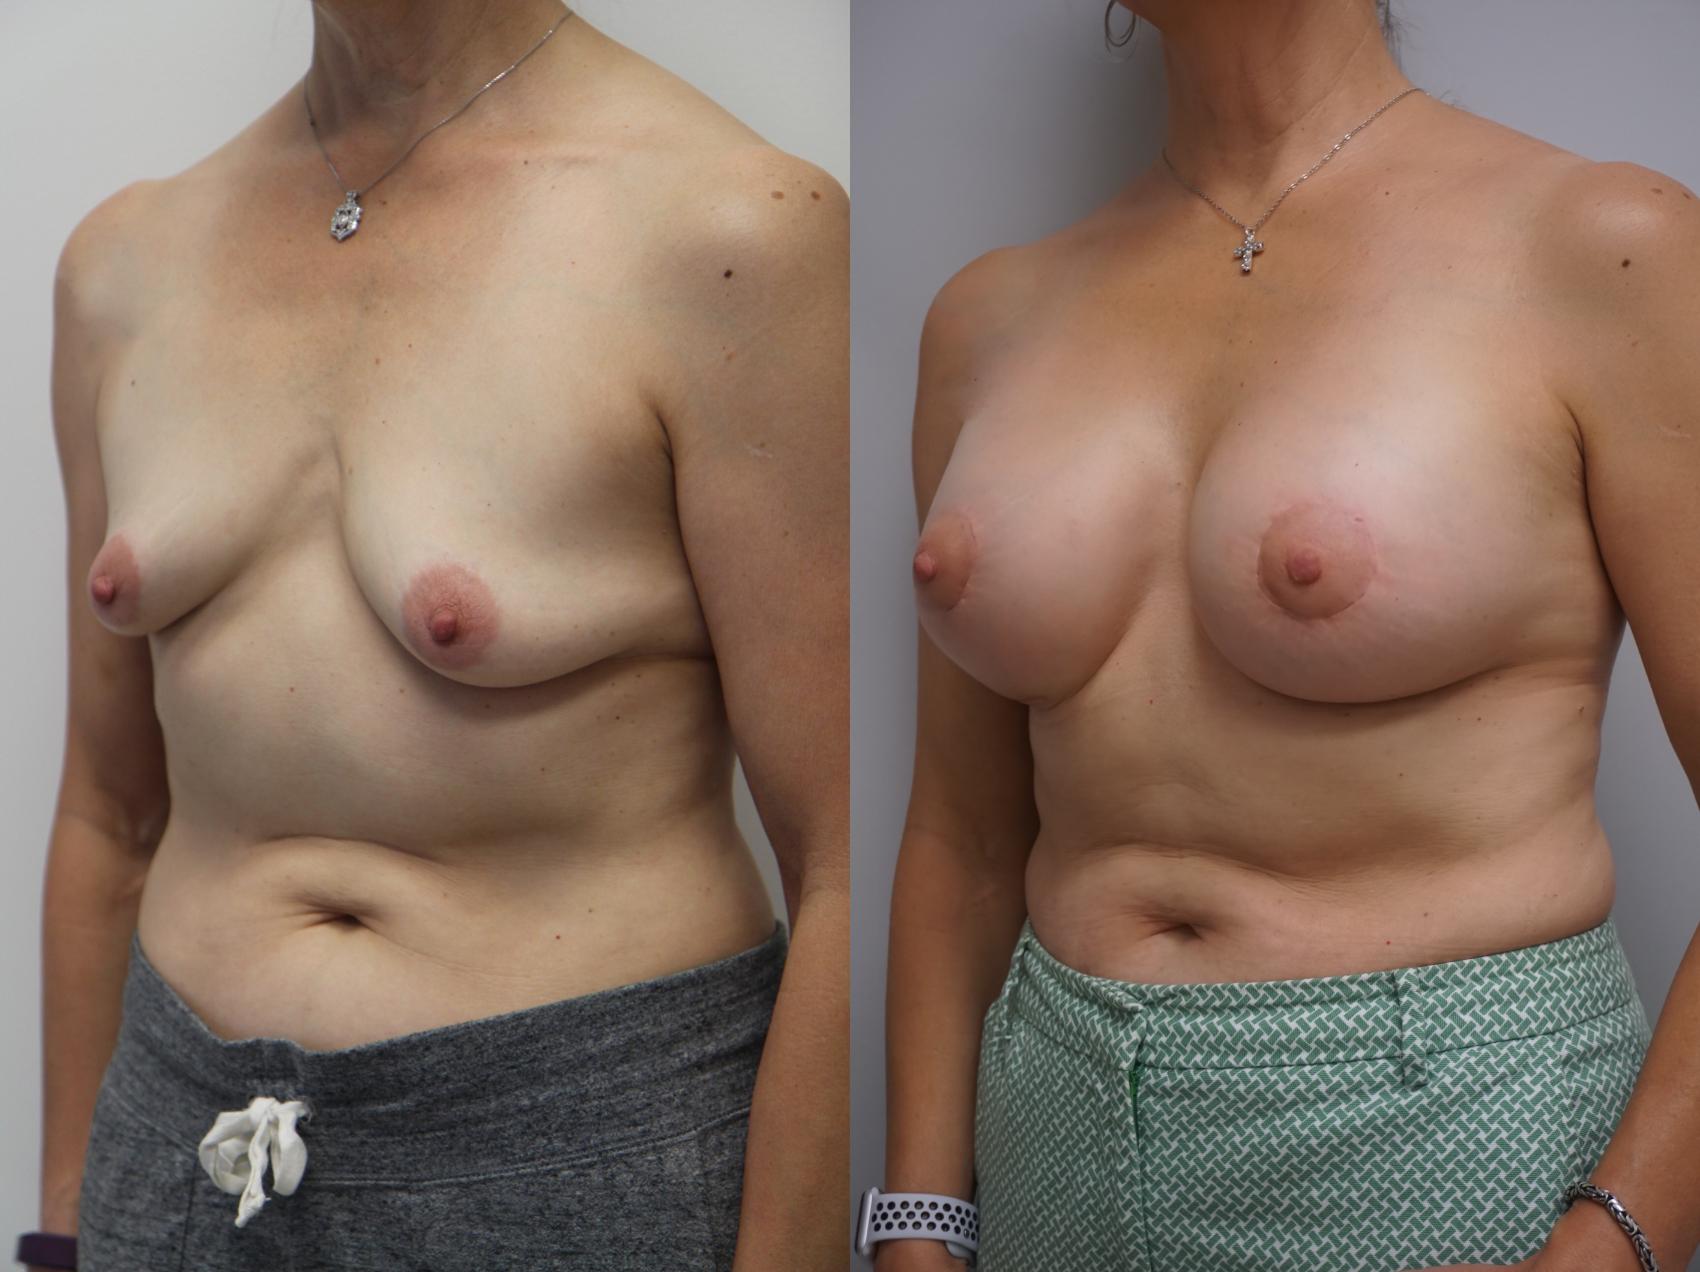 Breast Augmentation Before And After Photos